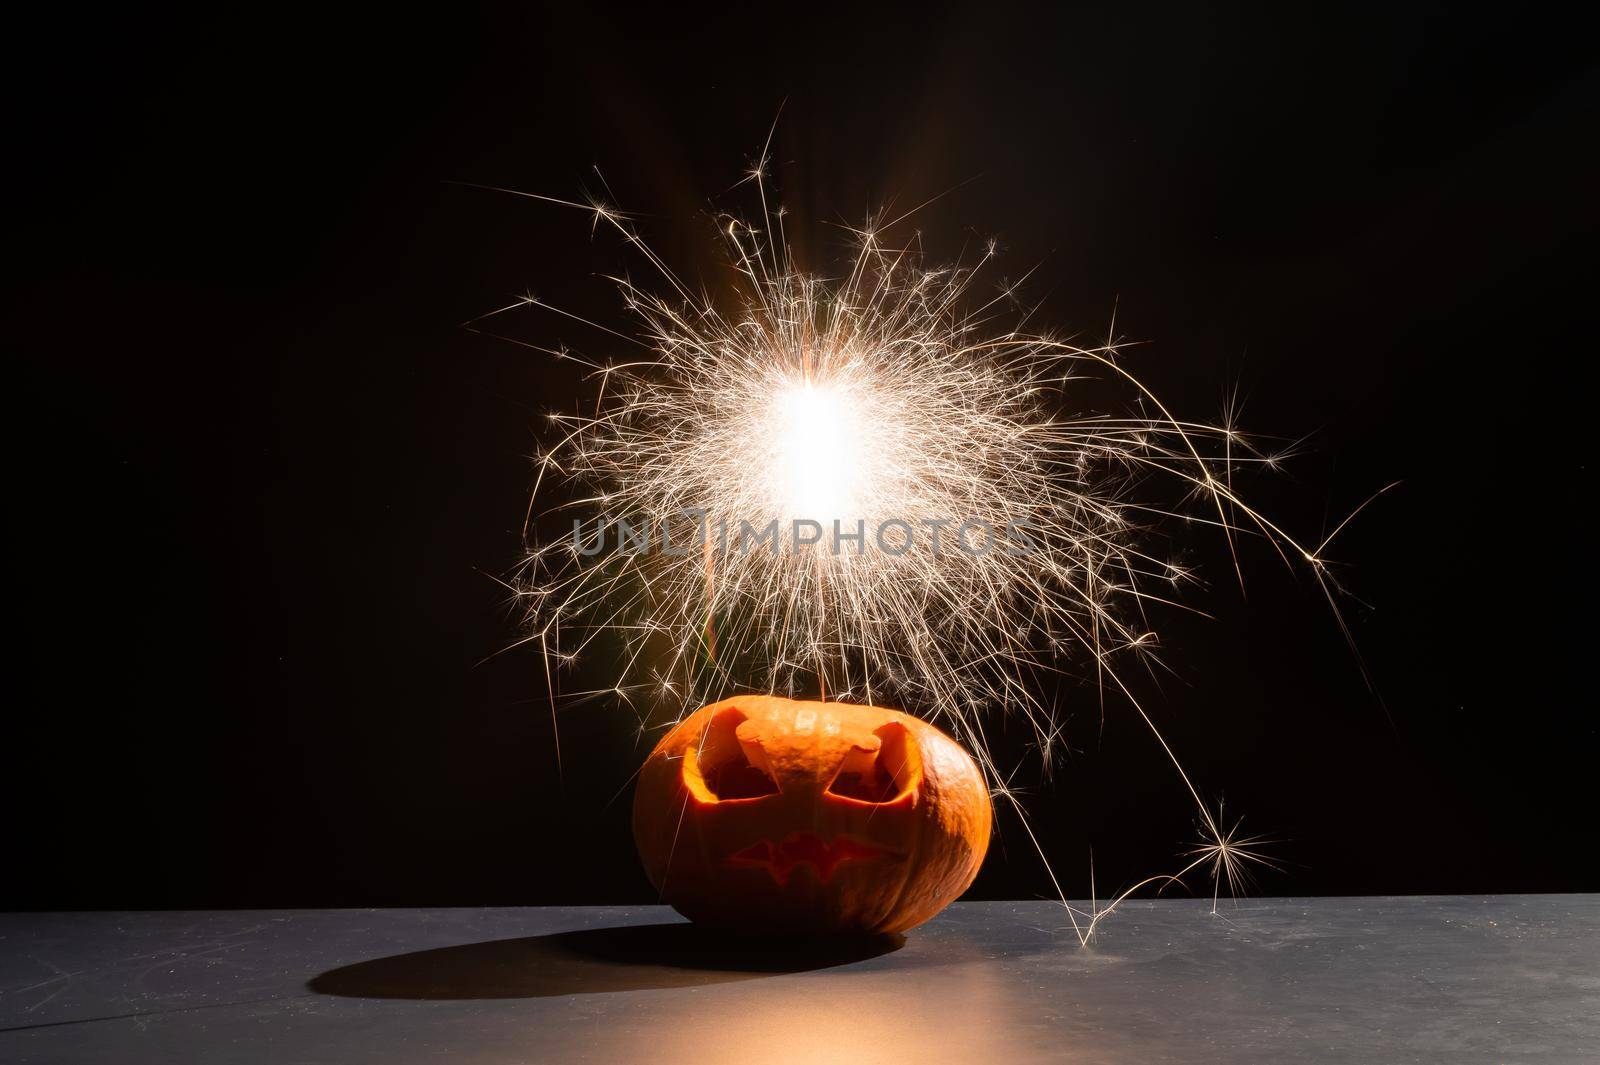 Halloween pumpkin with scary carved grimace and sparklers. jack-o-lantern by mrwed54